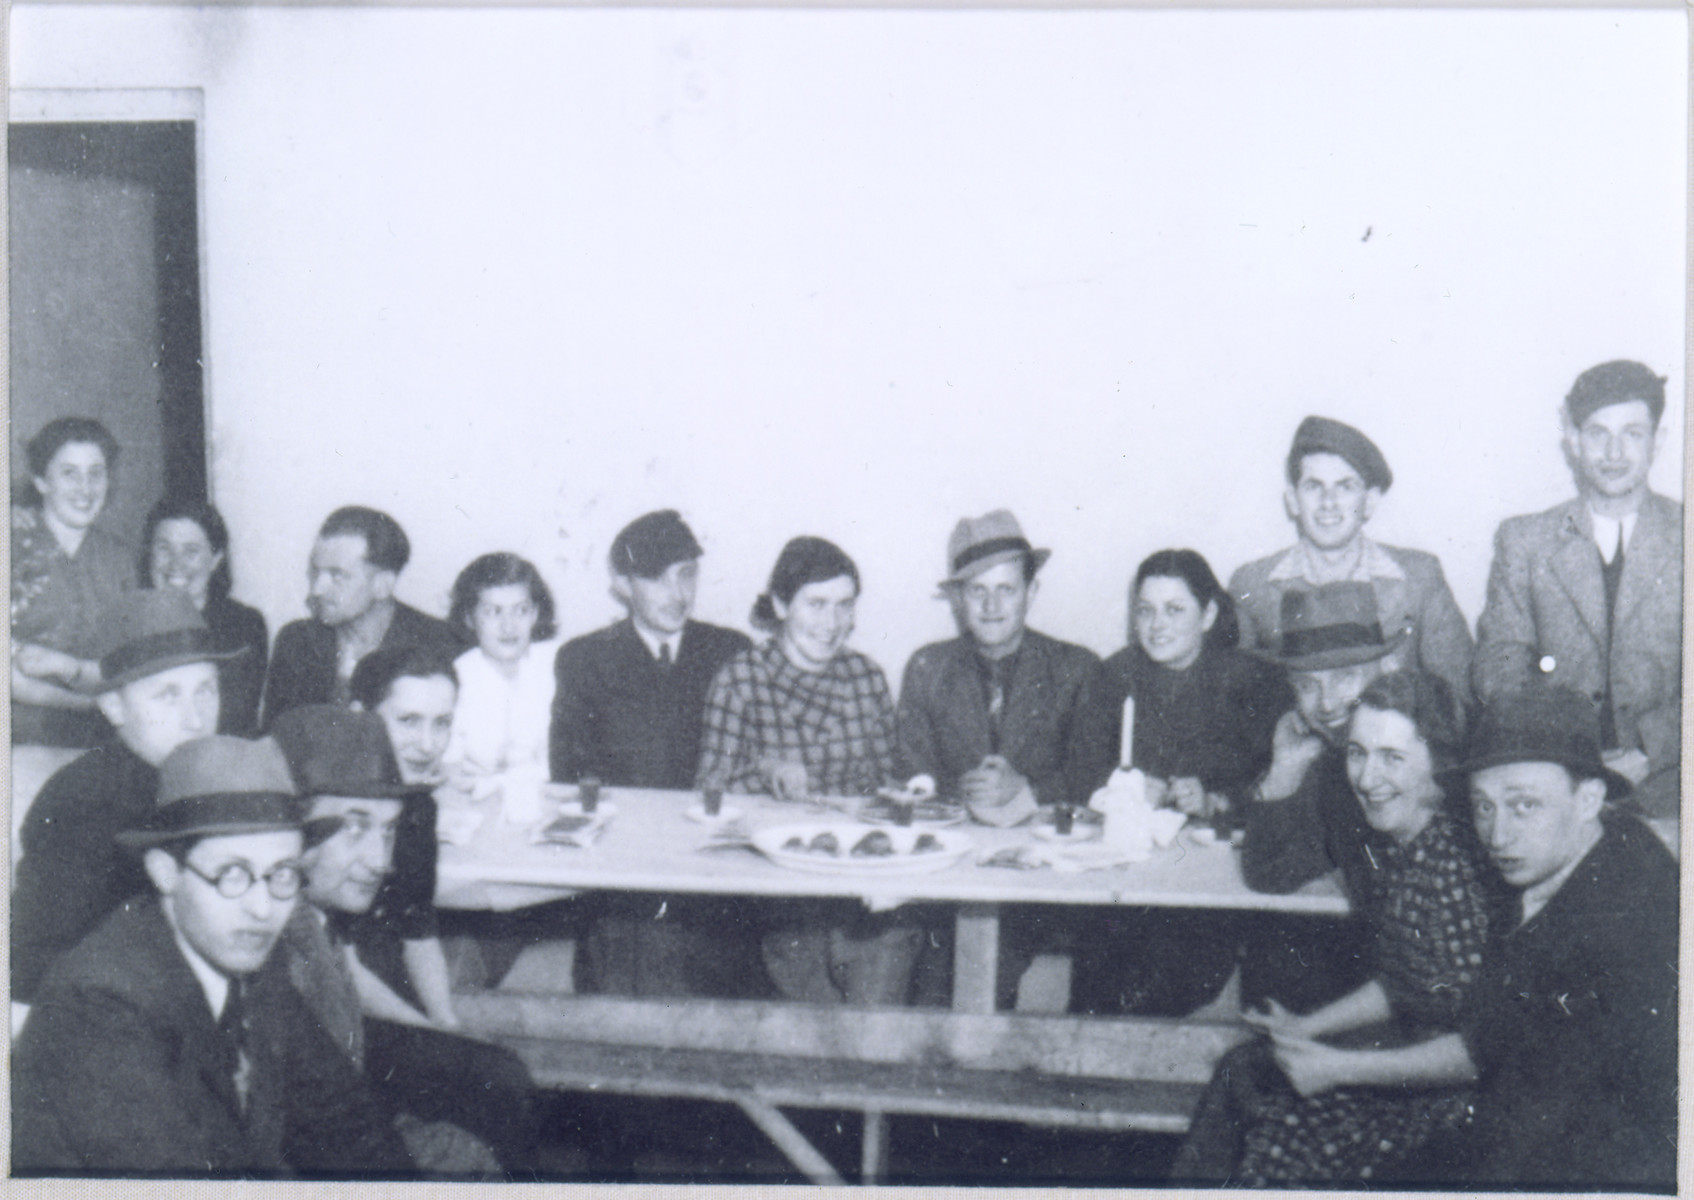 Gathering of Polish Jewish refugees at the "Internat" Betar youth hostel in Vilna.  

Among those pictured are Menahem Begin (at the front left); Fejga Szepsenwol (top left); and Chaya Szepsenwol (third from the right, behind the candle).  Pictured on the right are probably Batya and Israel Scheib (Eldad), future leader of the Lechi.

The Internat was one of a series of communal residences established by the American Jewish Joint Distribution Committee to help deal with the housing crisis that resulted when thousands of Polish Jewish refugees flooded into Vilna in the months following the outbreak of WWII.  The JDC grouped the refugees (who were largely unaccompanied youth) in residences according to youth movement affiliation.